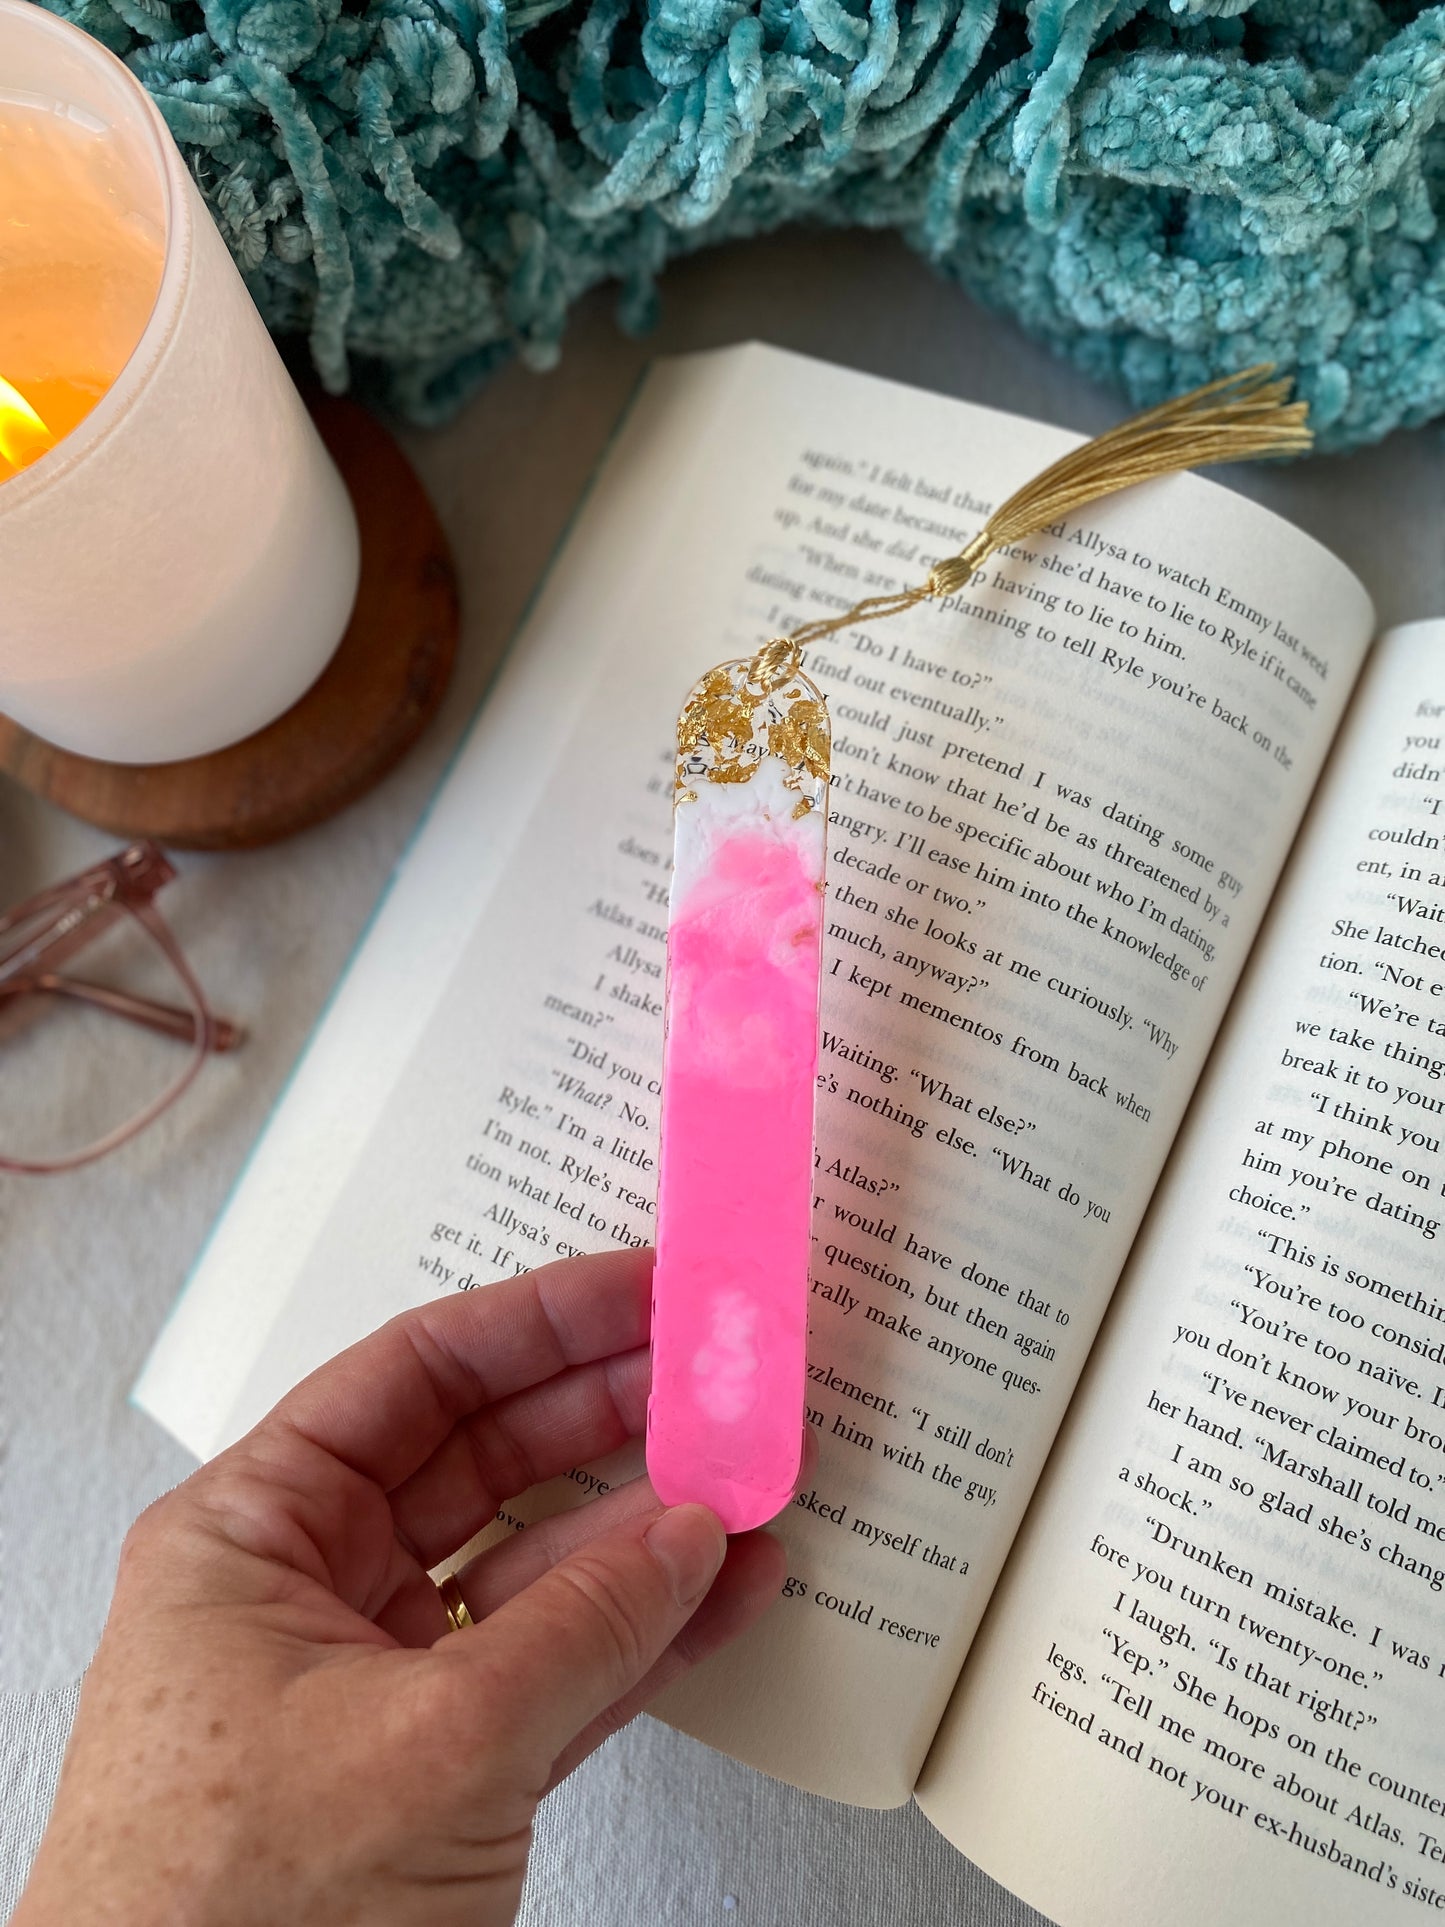 BOOKMARK - created in Barbie pink resin with gold flakes